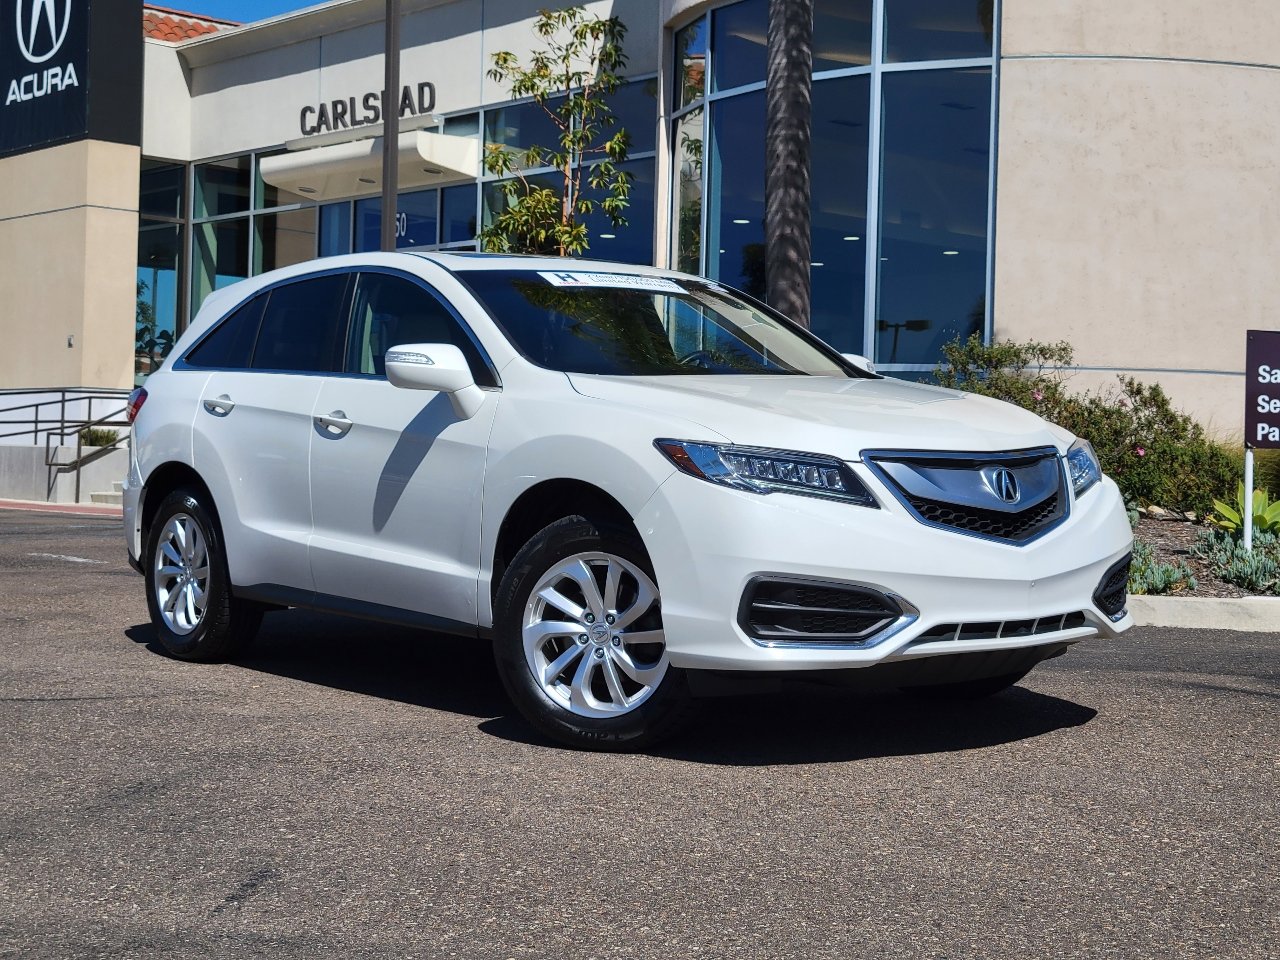 Used 2018 Acura RDX for Sale Right Now - Autotrader